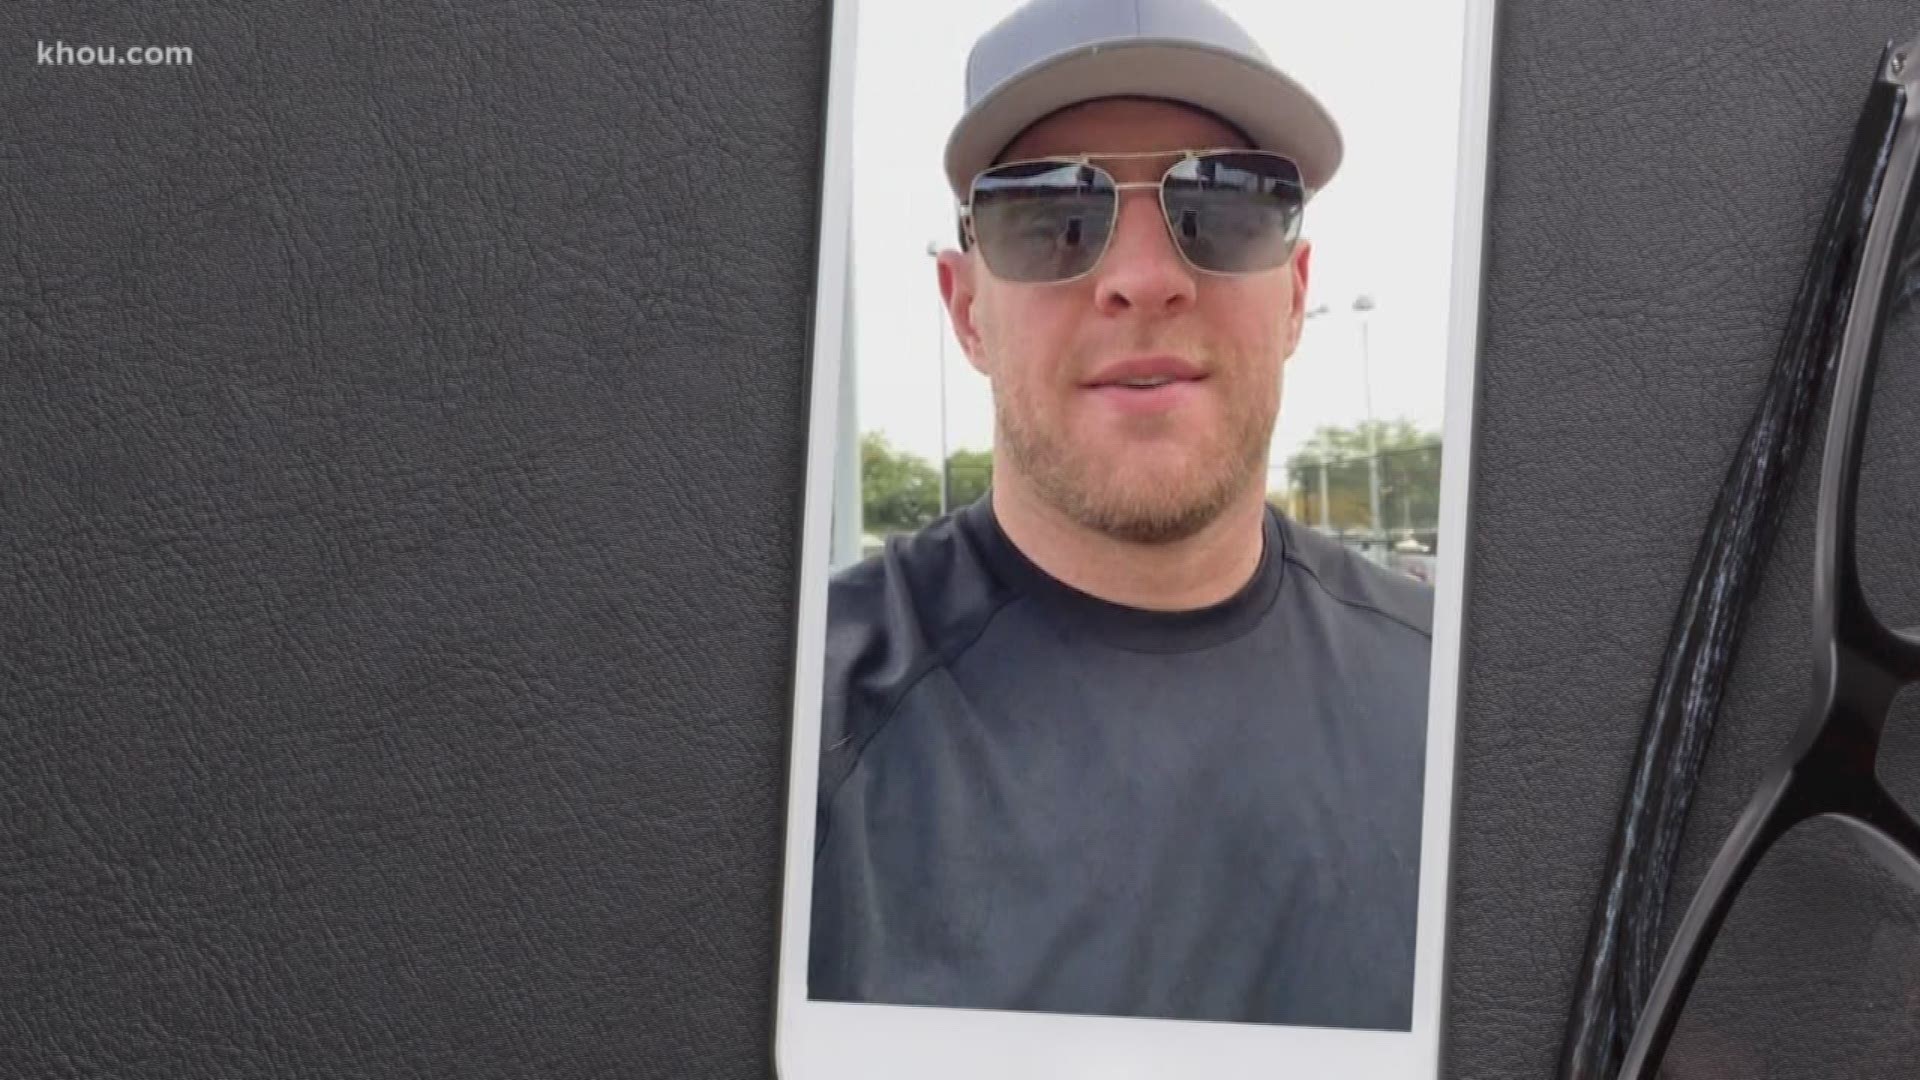 J.J. Watt gave out a number so he can communicate with fans. But by texting him, will that put you on a spam list? KHOU 11 reporter Stephanie Whitfield explains.